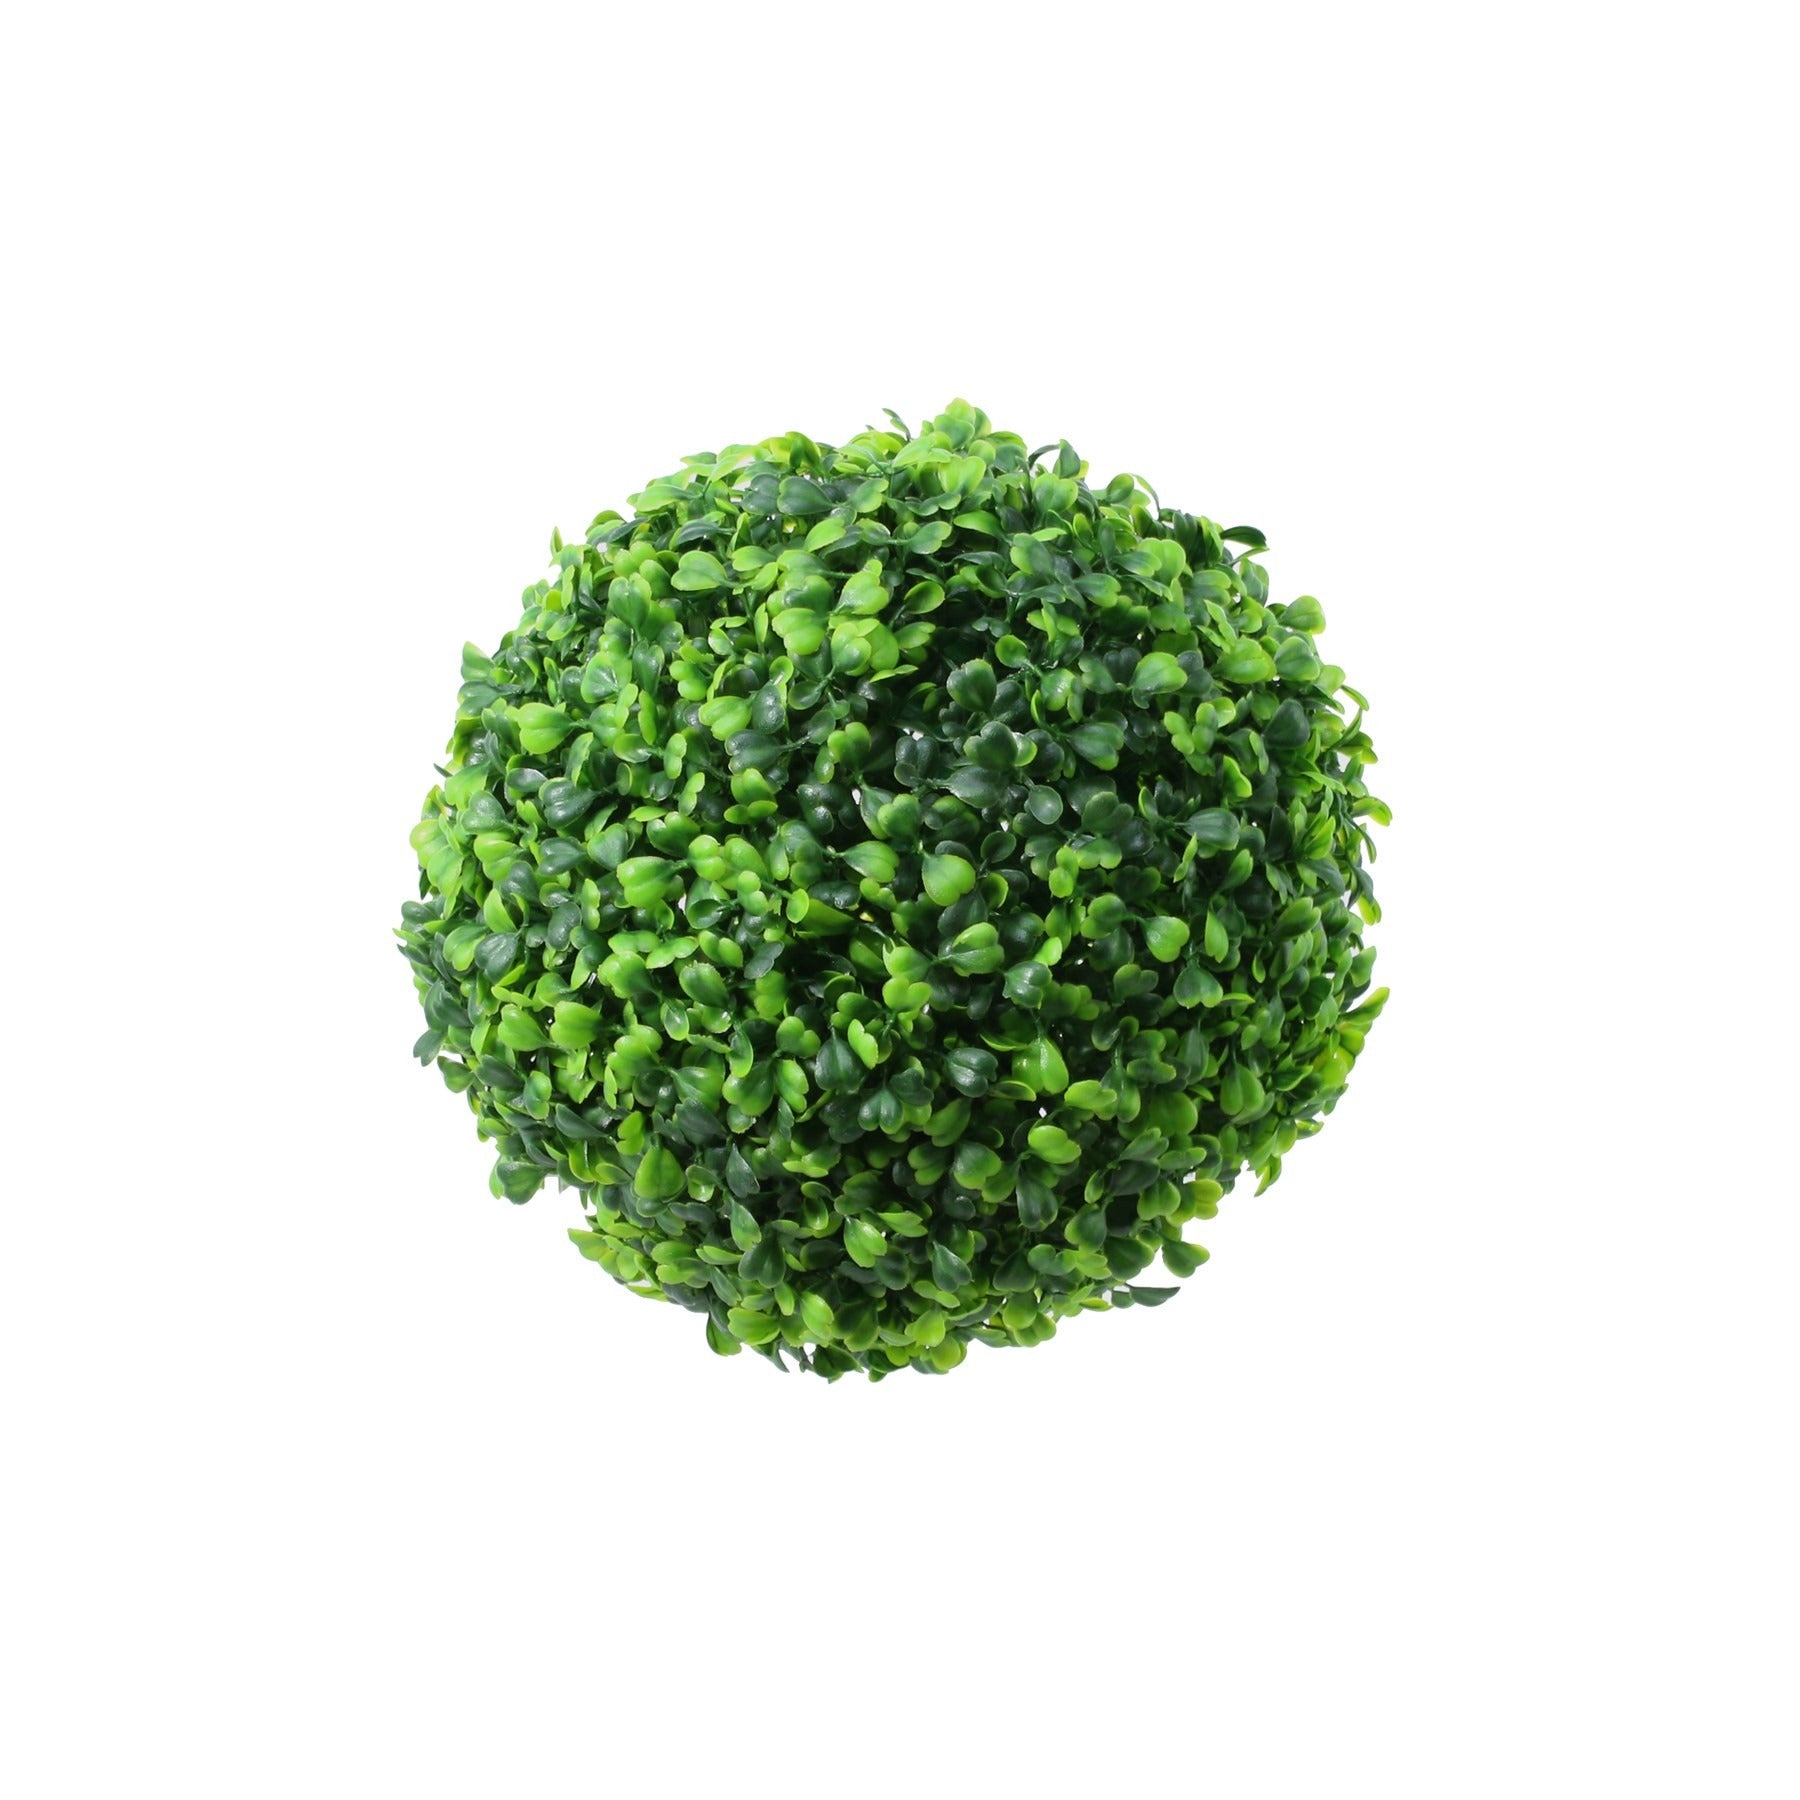 View Exterior UV Resistant Buxus Greenery Ball 18cm information